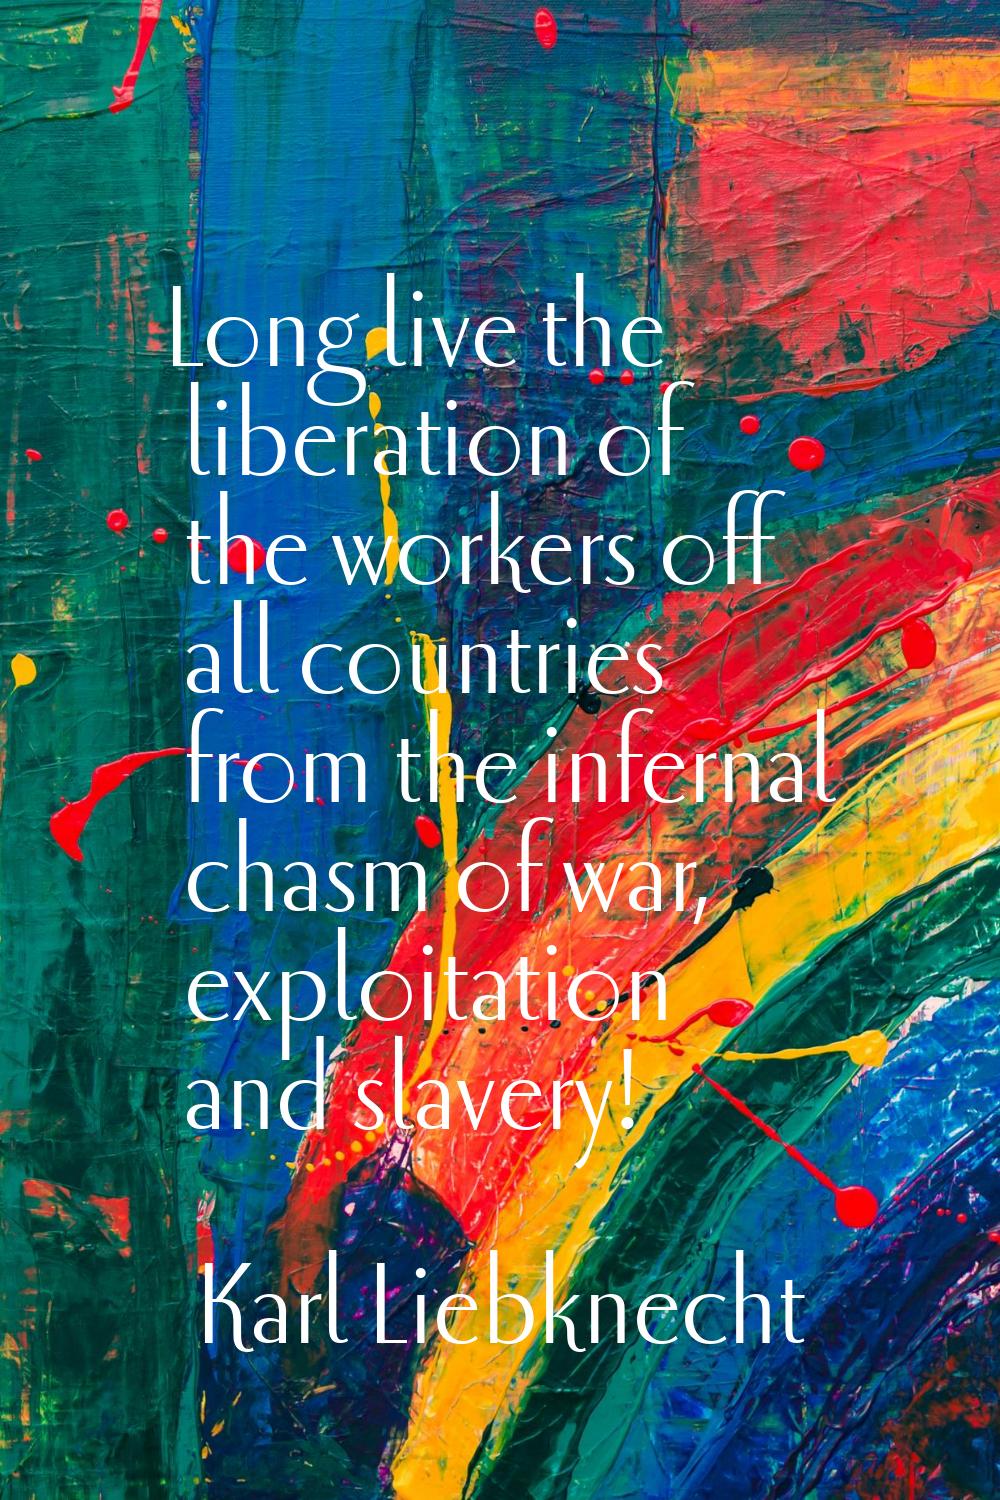 Long live the liberation of the workers off all countries from the infernal chasm of war, exploitat